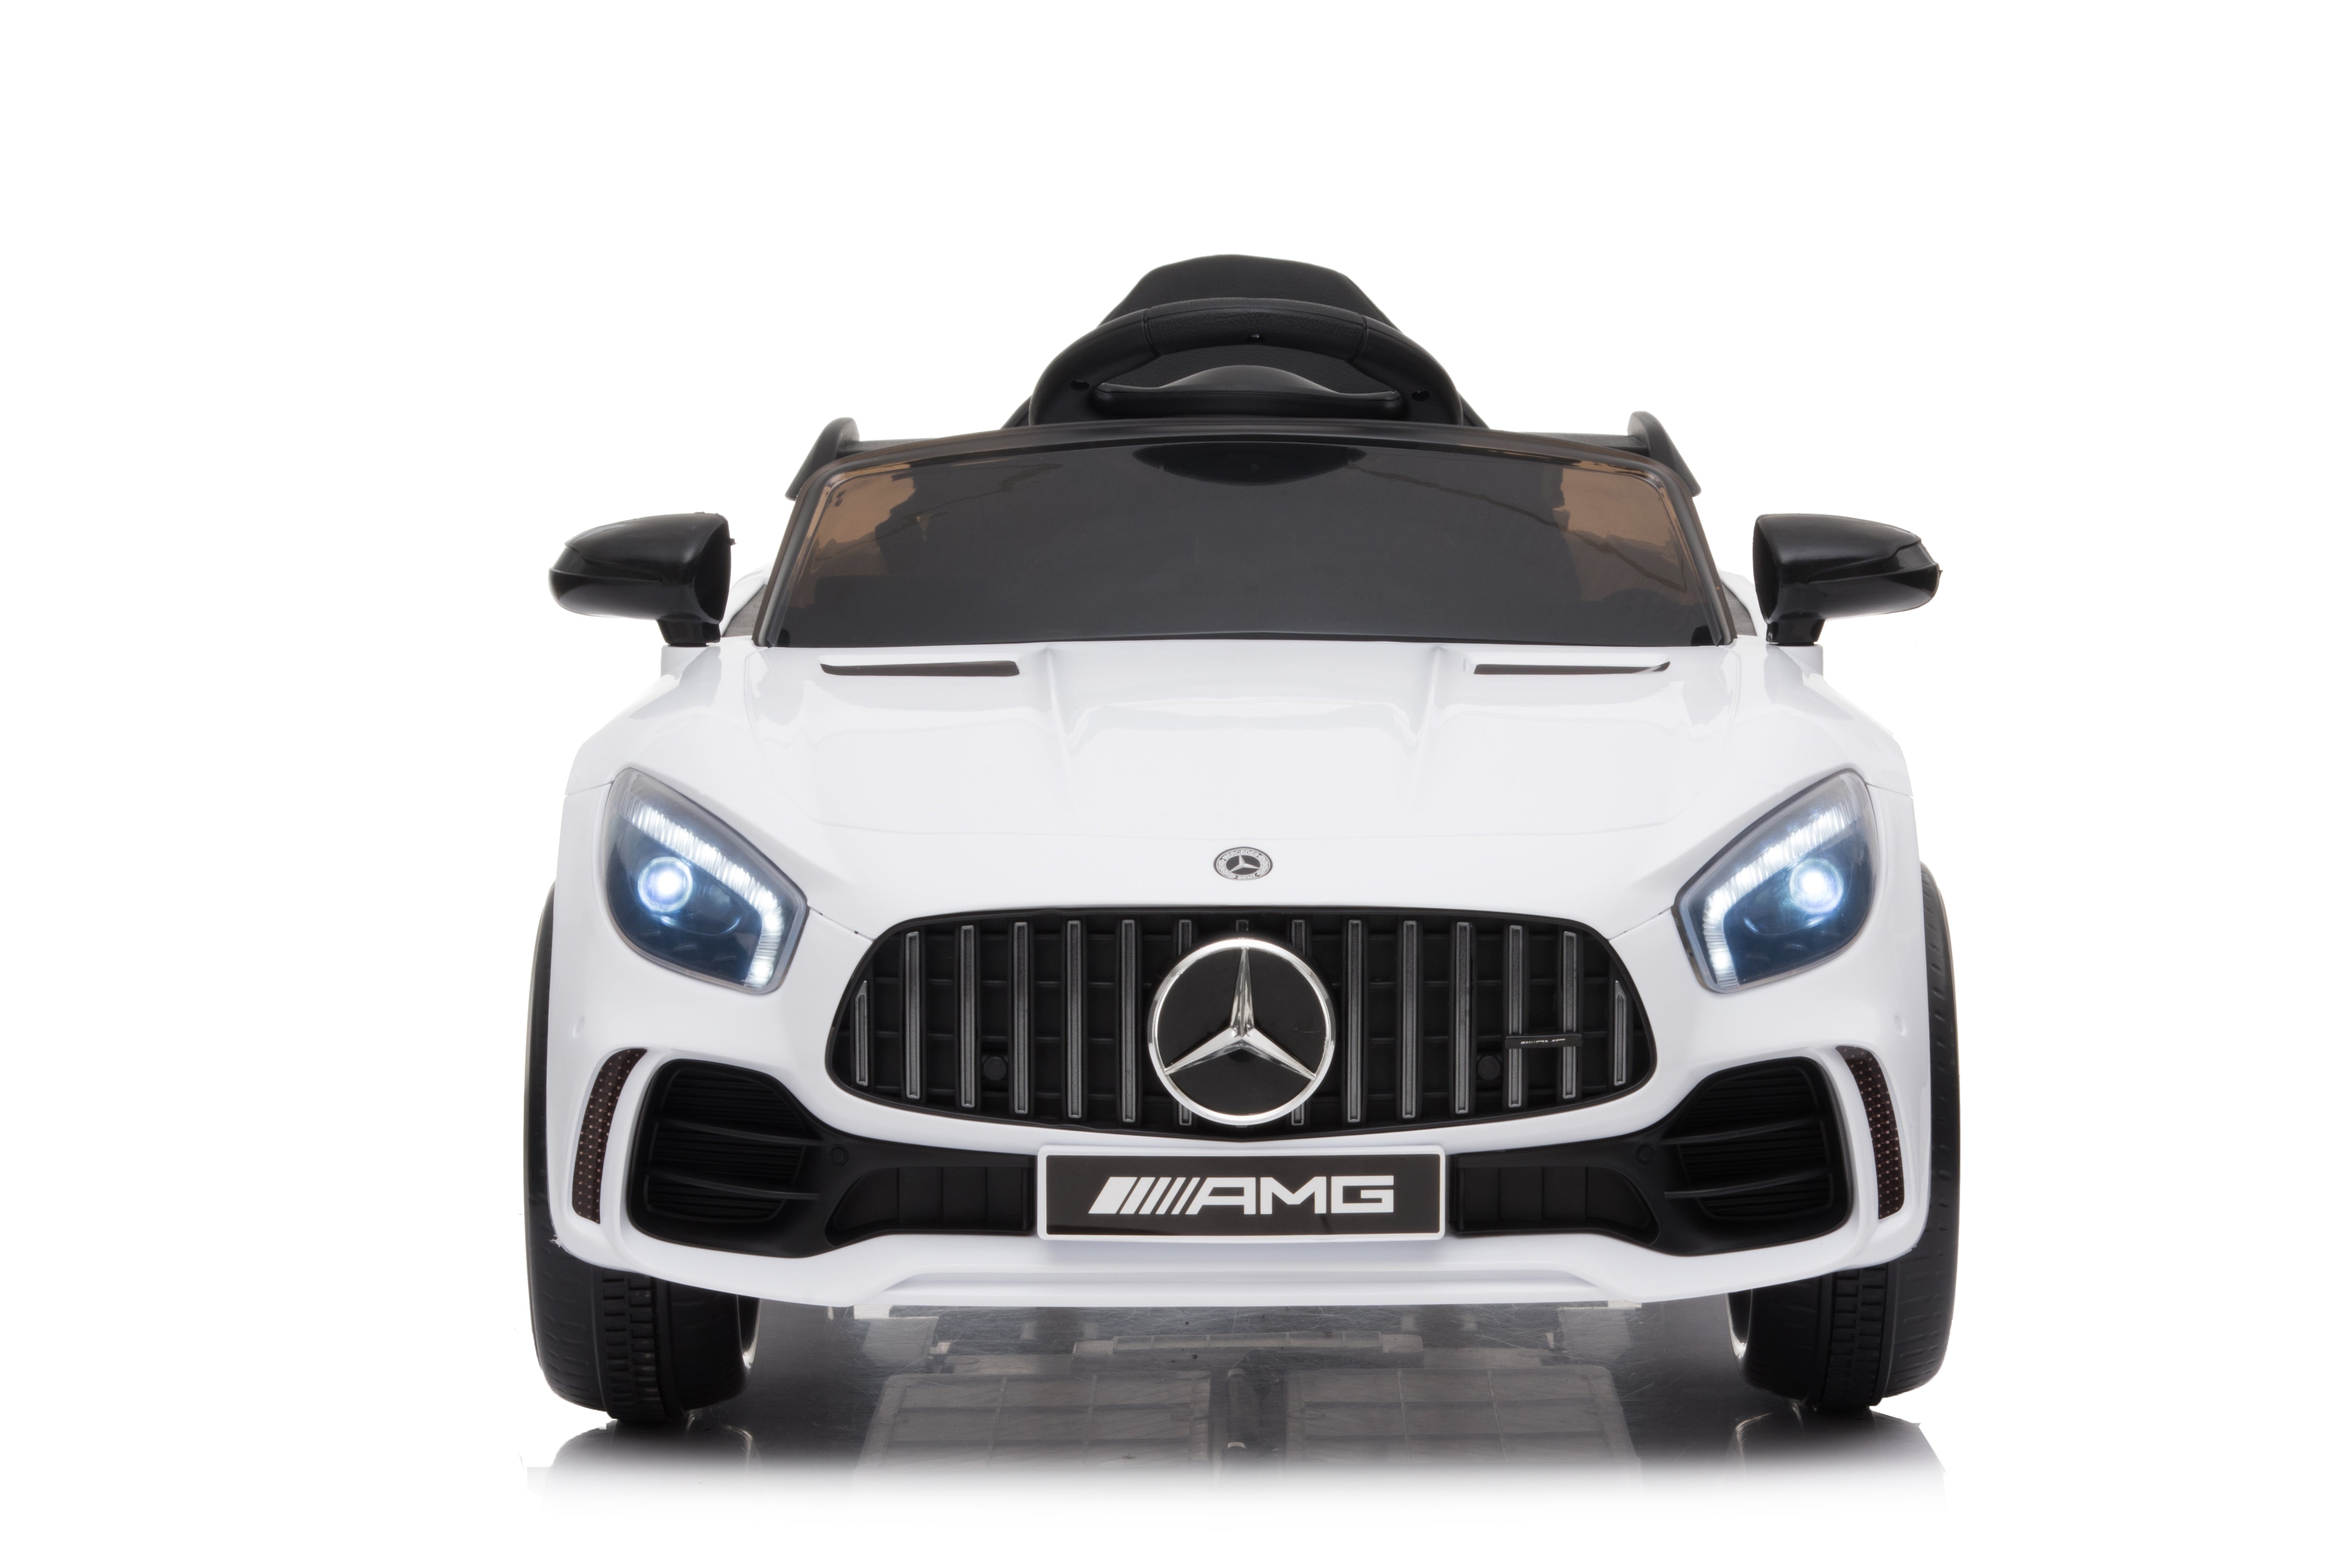 SKONYON 12V Licensed Mercedes Benz Kids Ride On Car Electric Vehicle with 2 Powerful Motors, LED Lights MP3 Music Horn, White